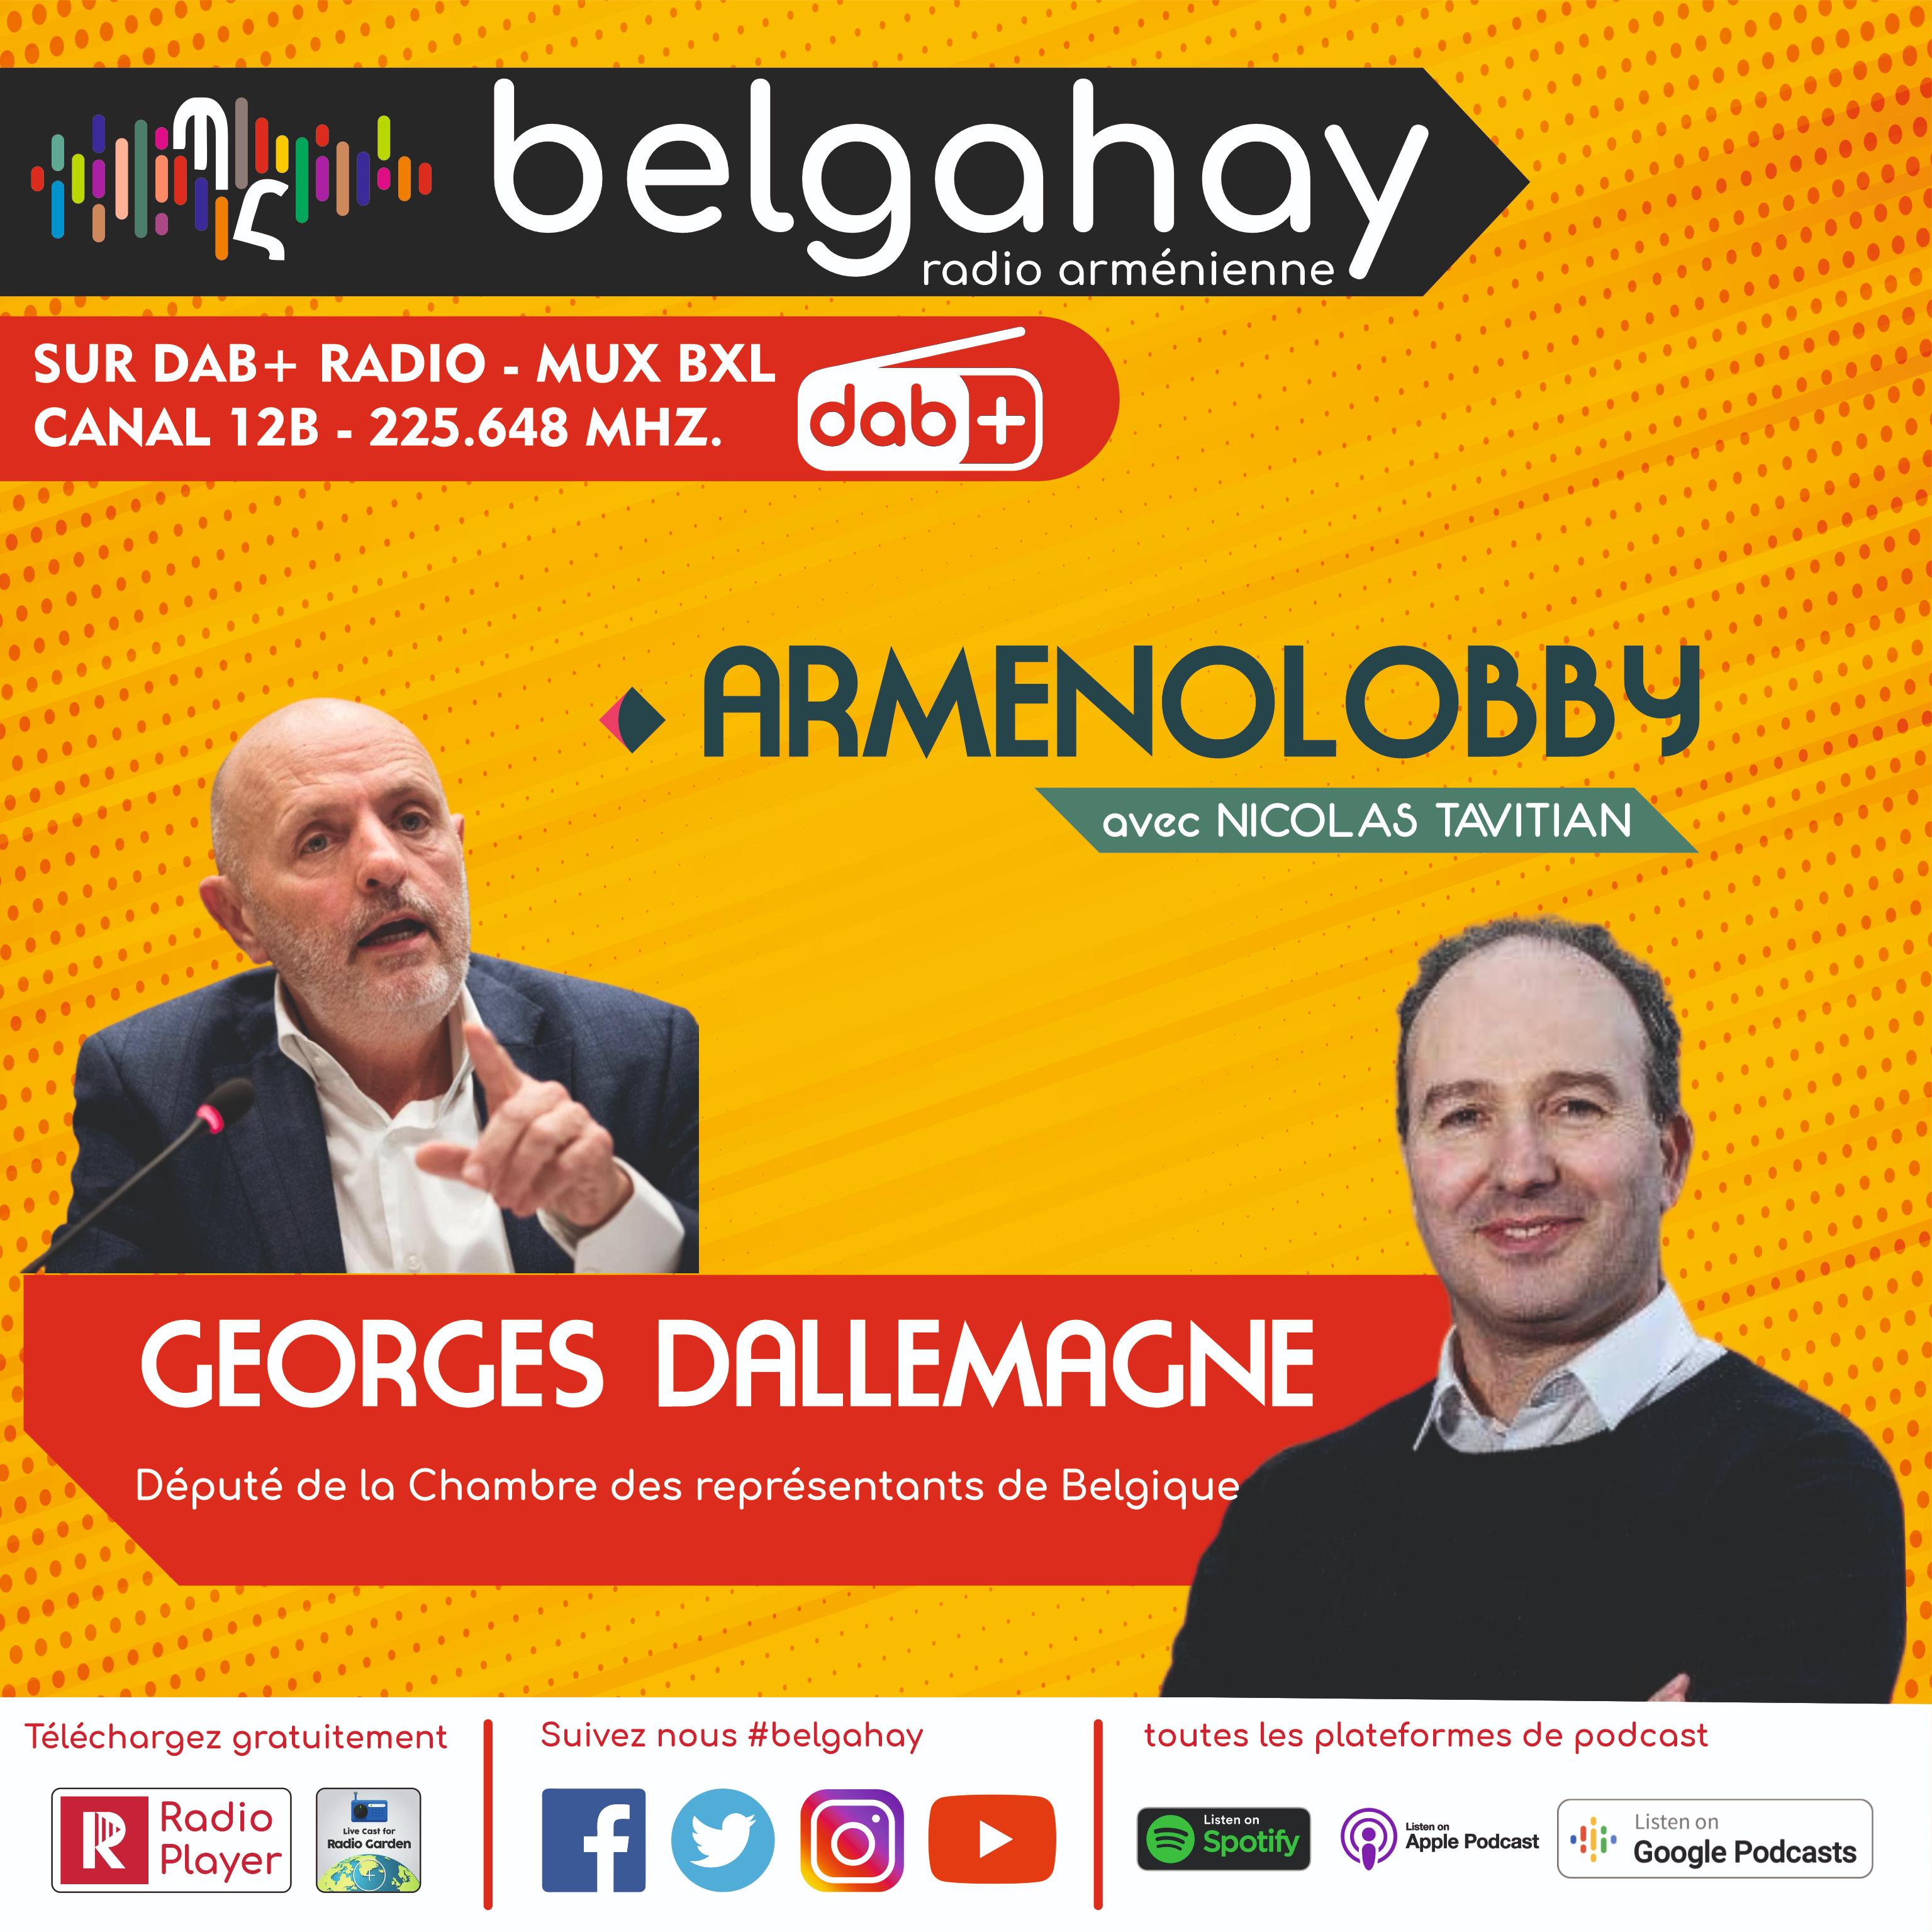 Armenolobby & Georges Dallemagne